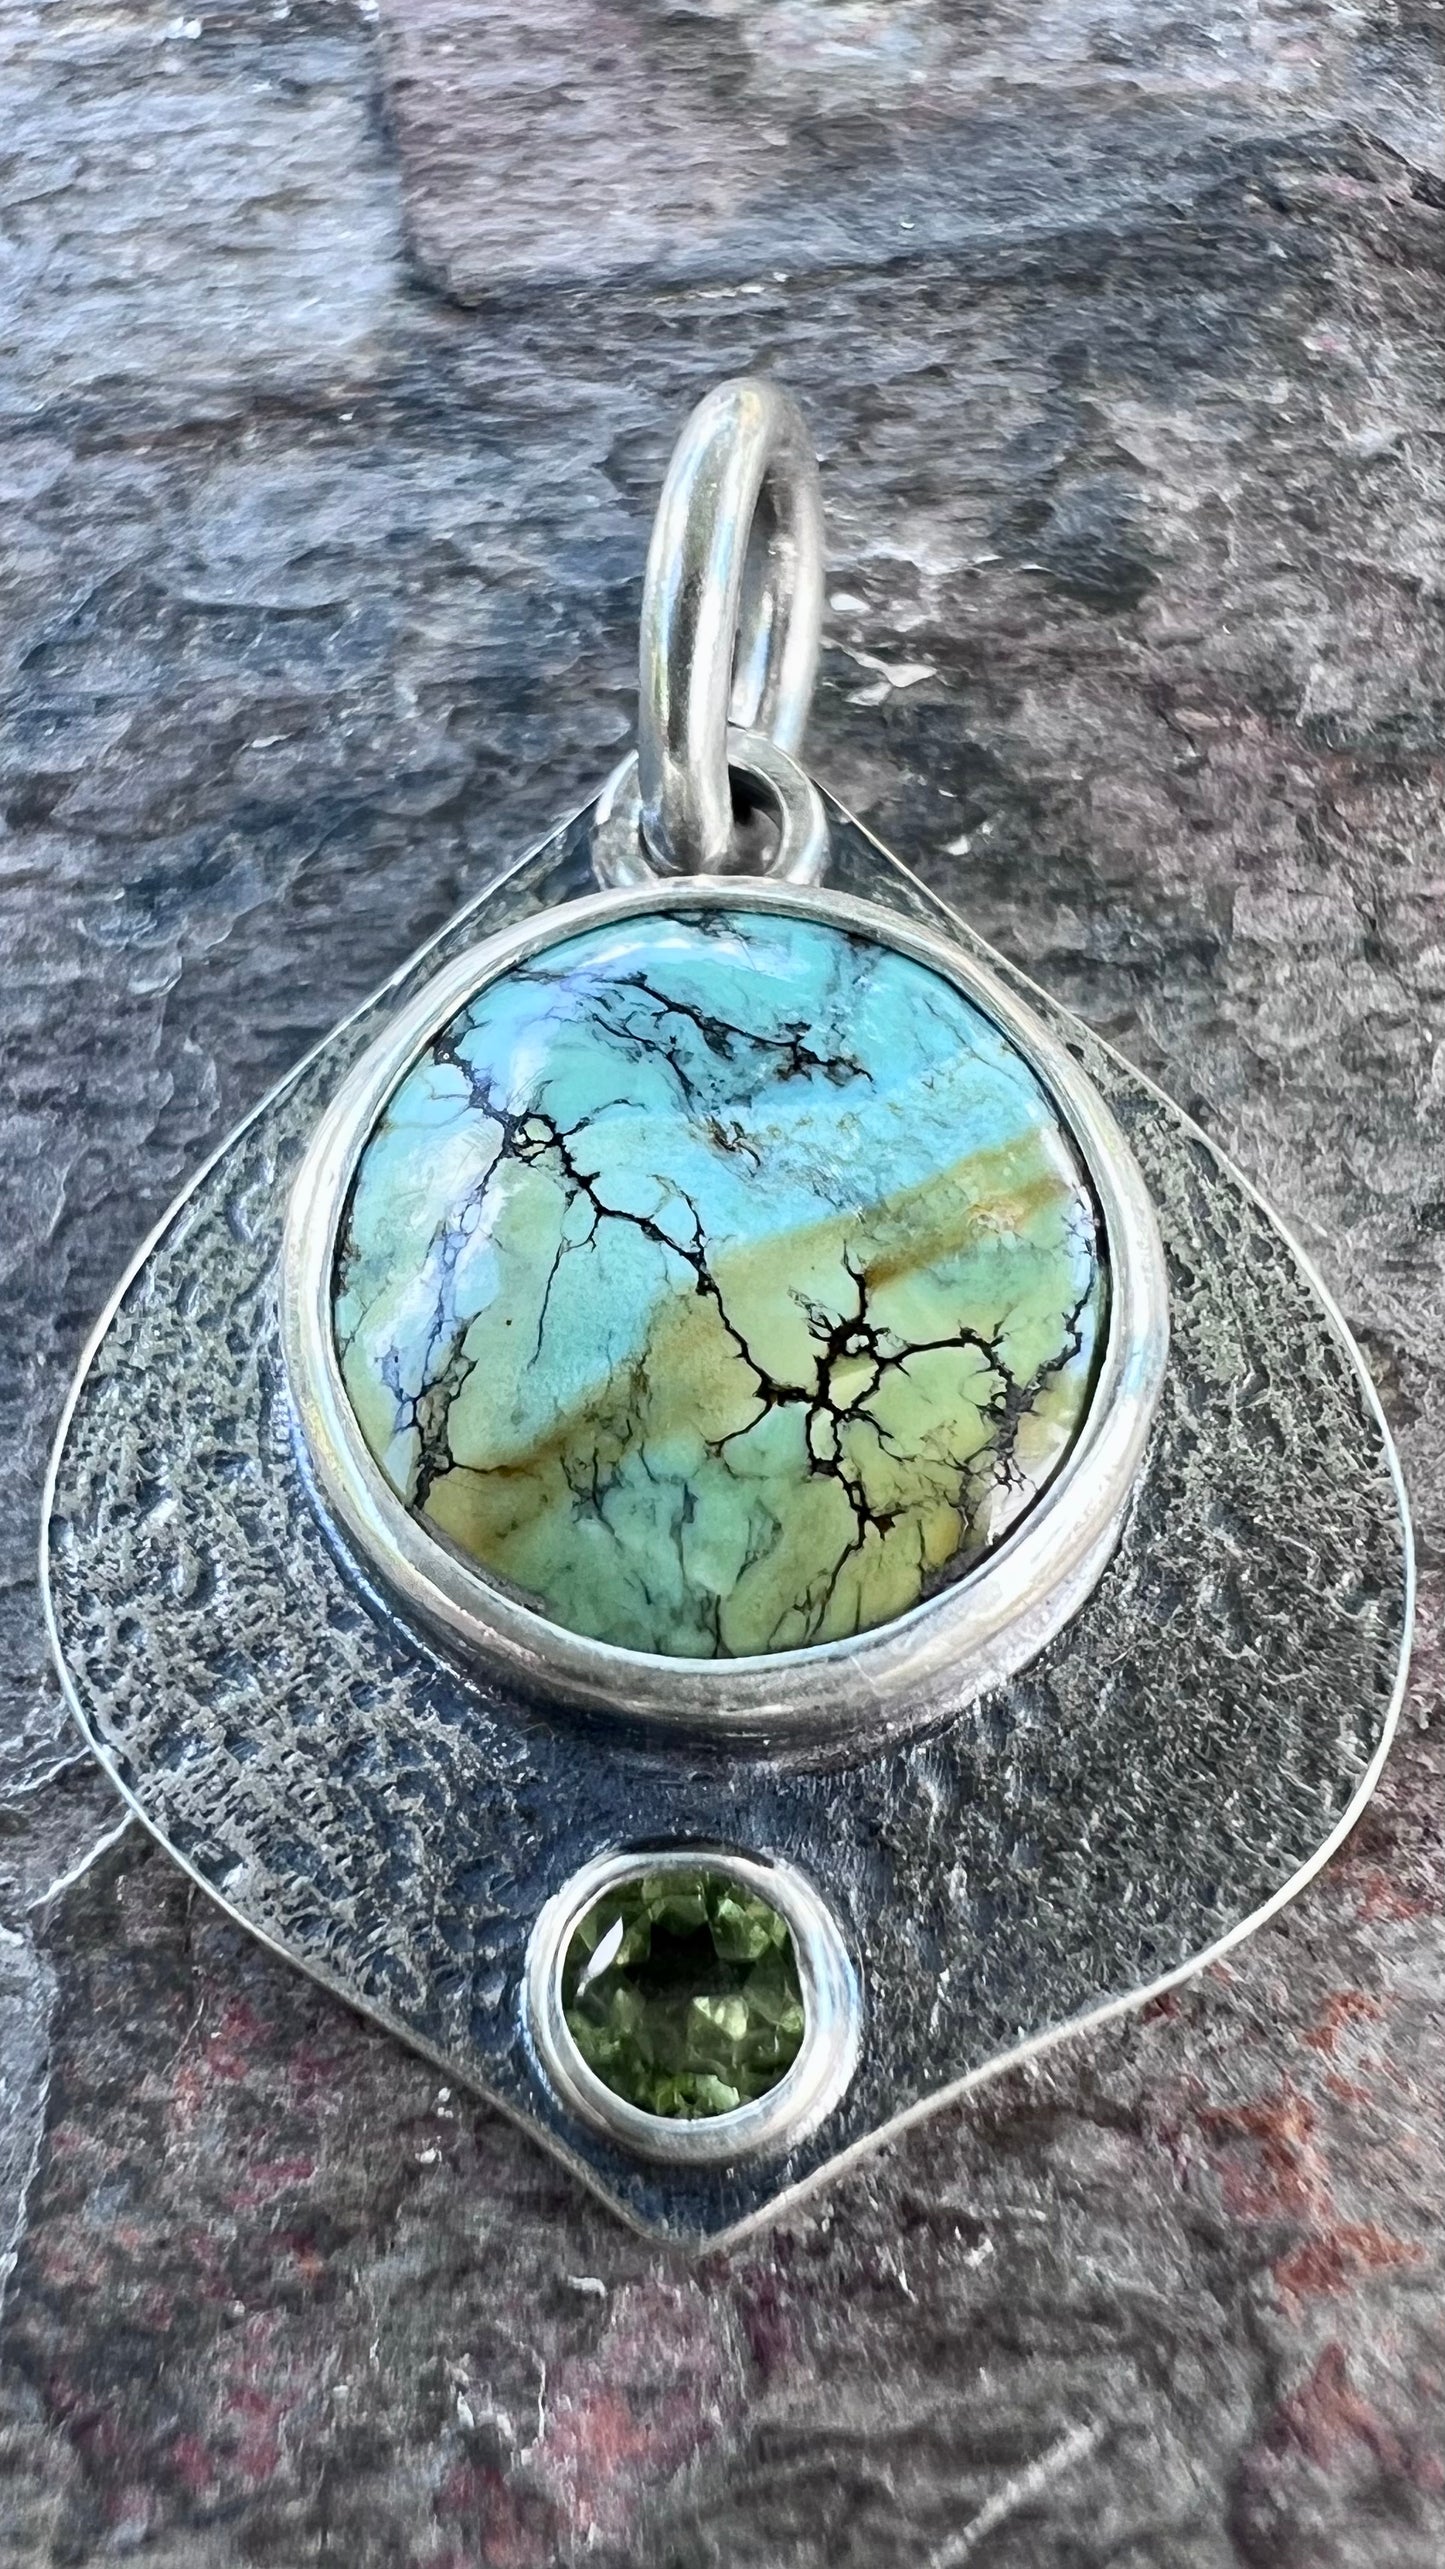 Turquoise and Peridot Sterling Silver Pendant - One-of-a-Kind Handmade Pendant